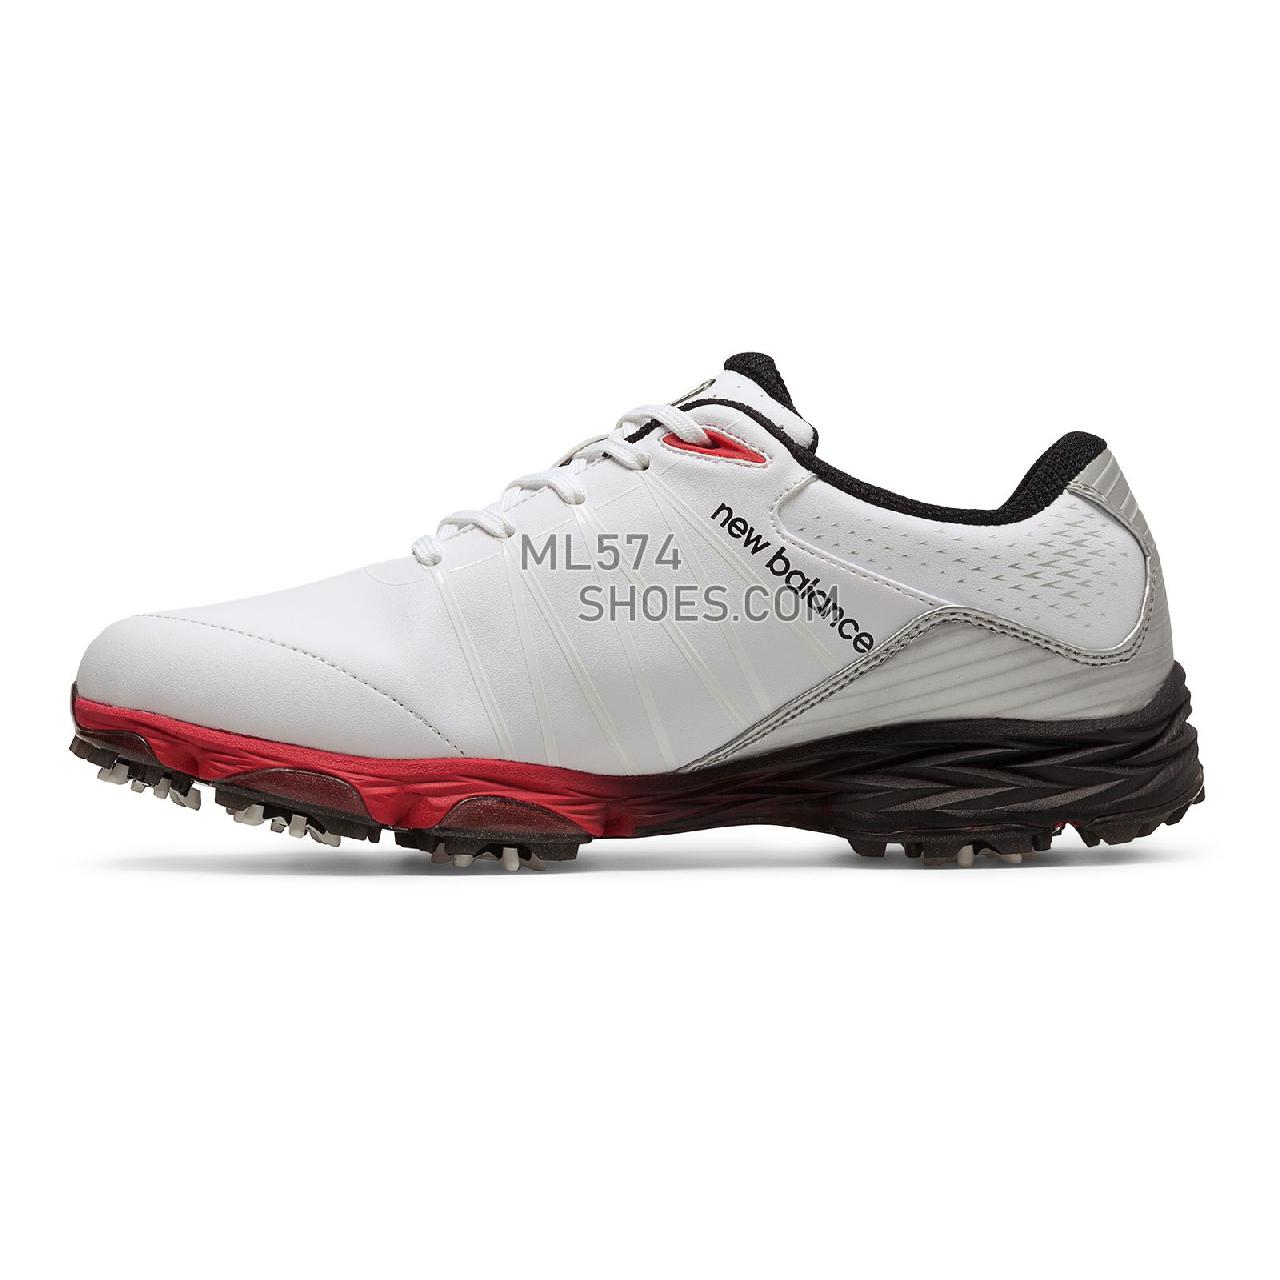 New Balance New Balance Golf 2004 - Men's 2004 - Golf White with Red and Black - NBG2004WR